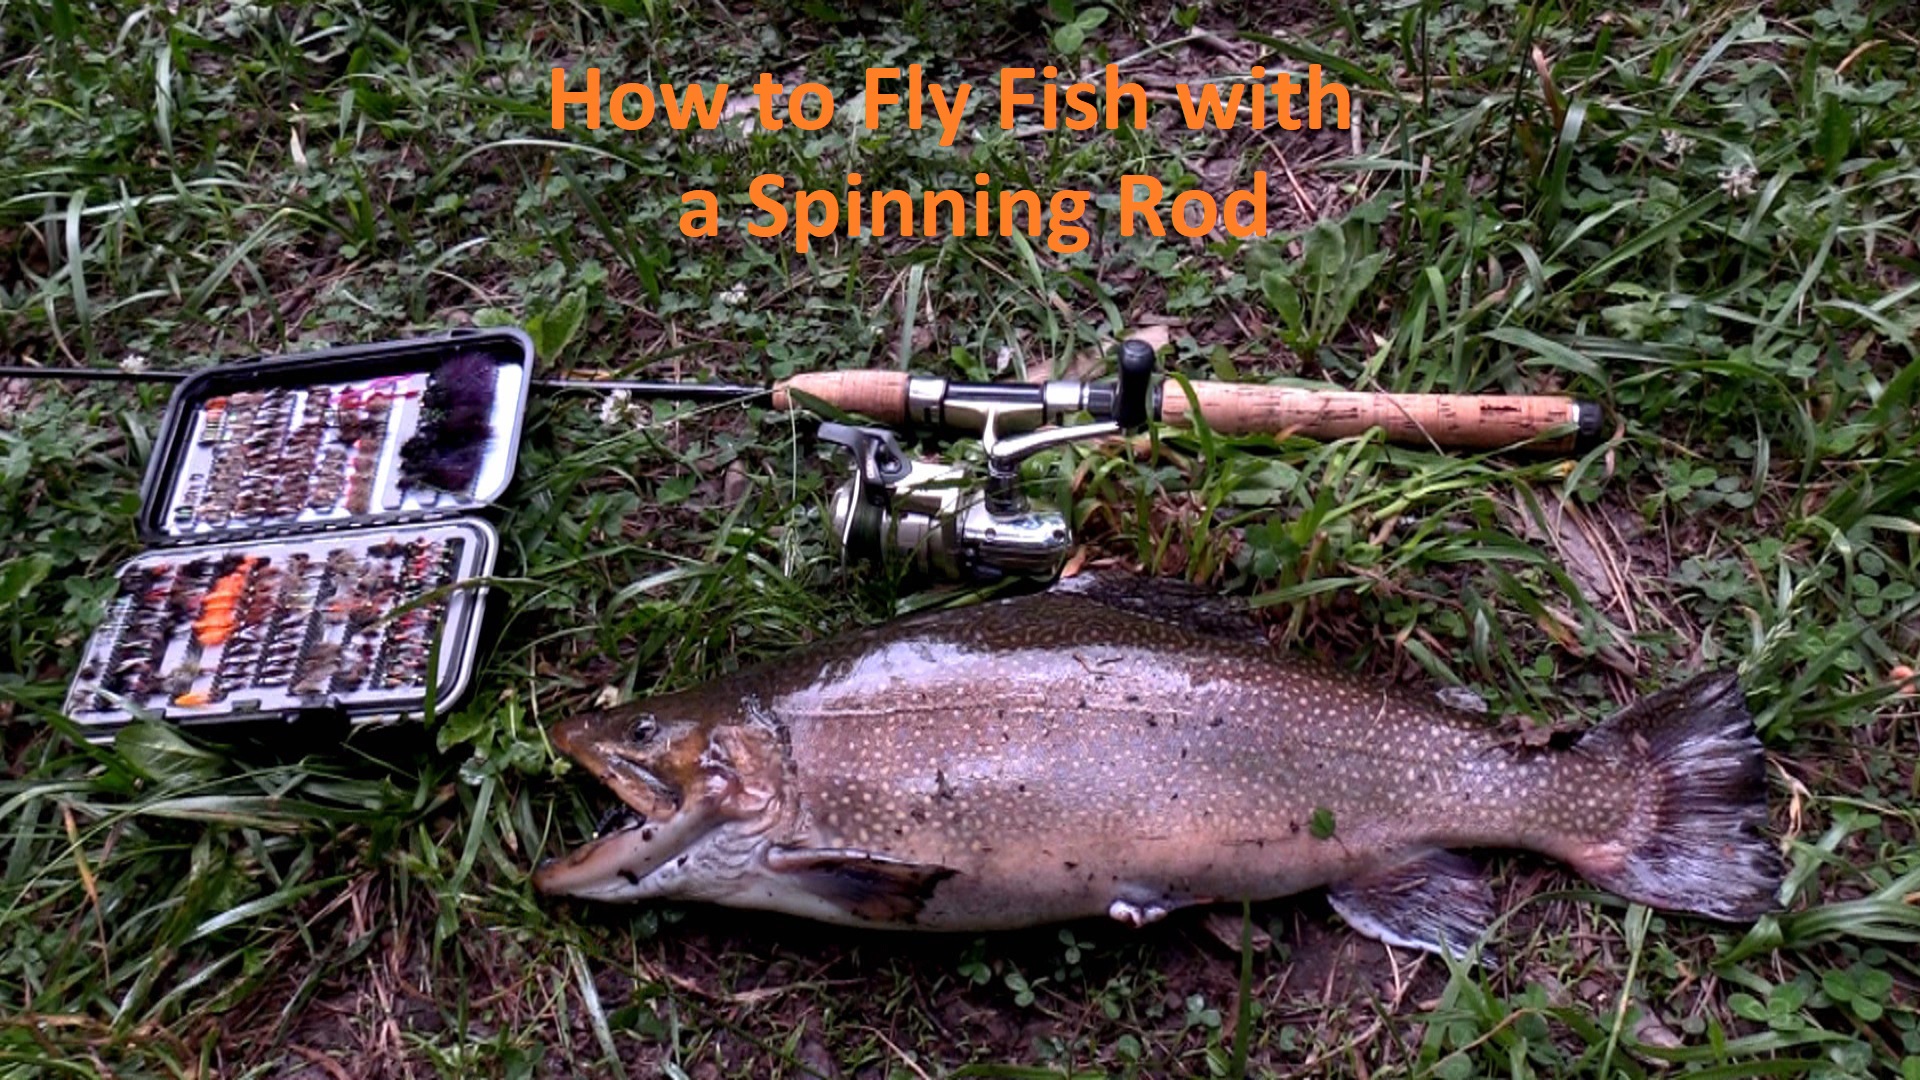 How to Fly Fish with a Spinning Rod